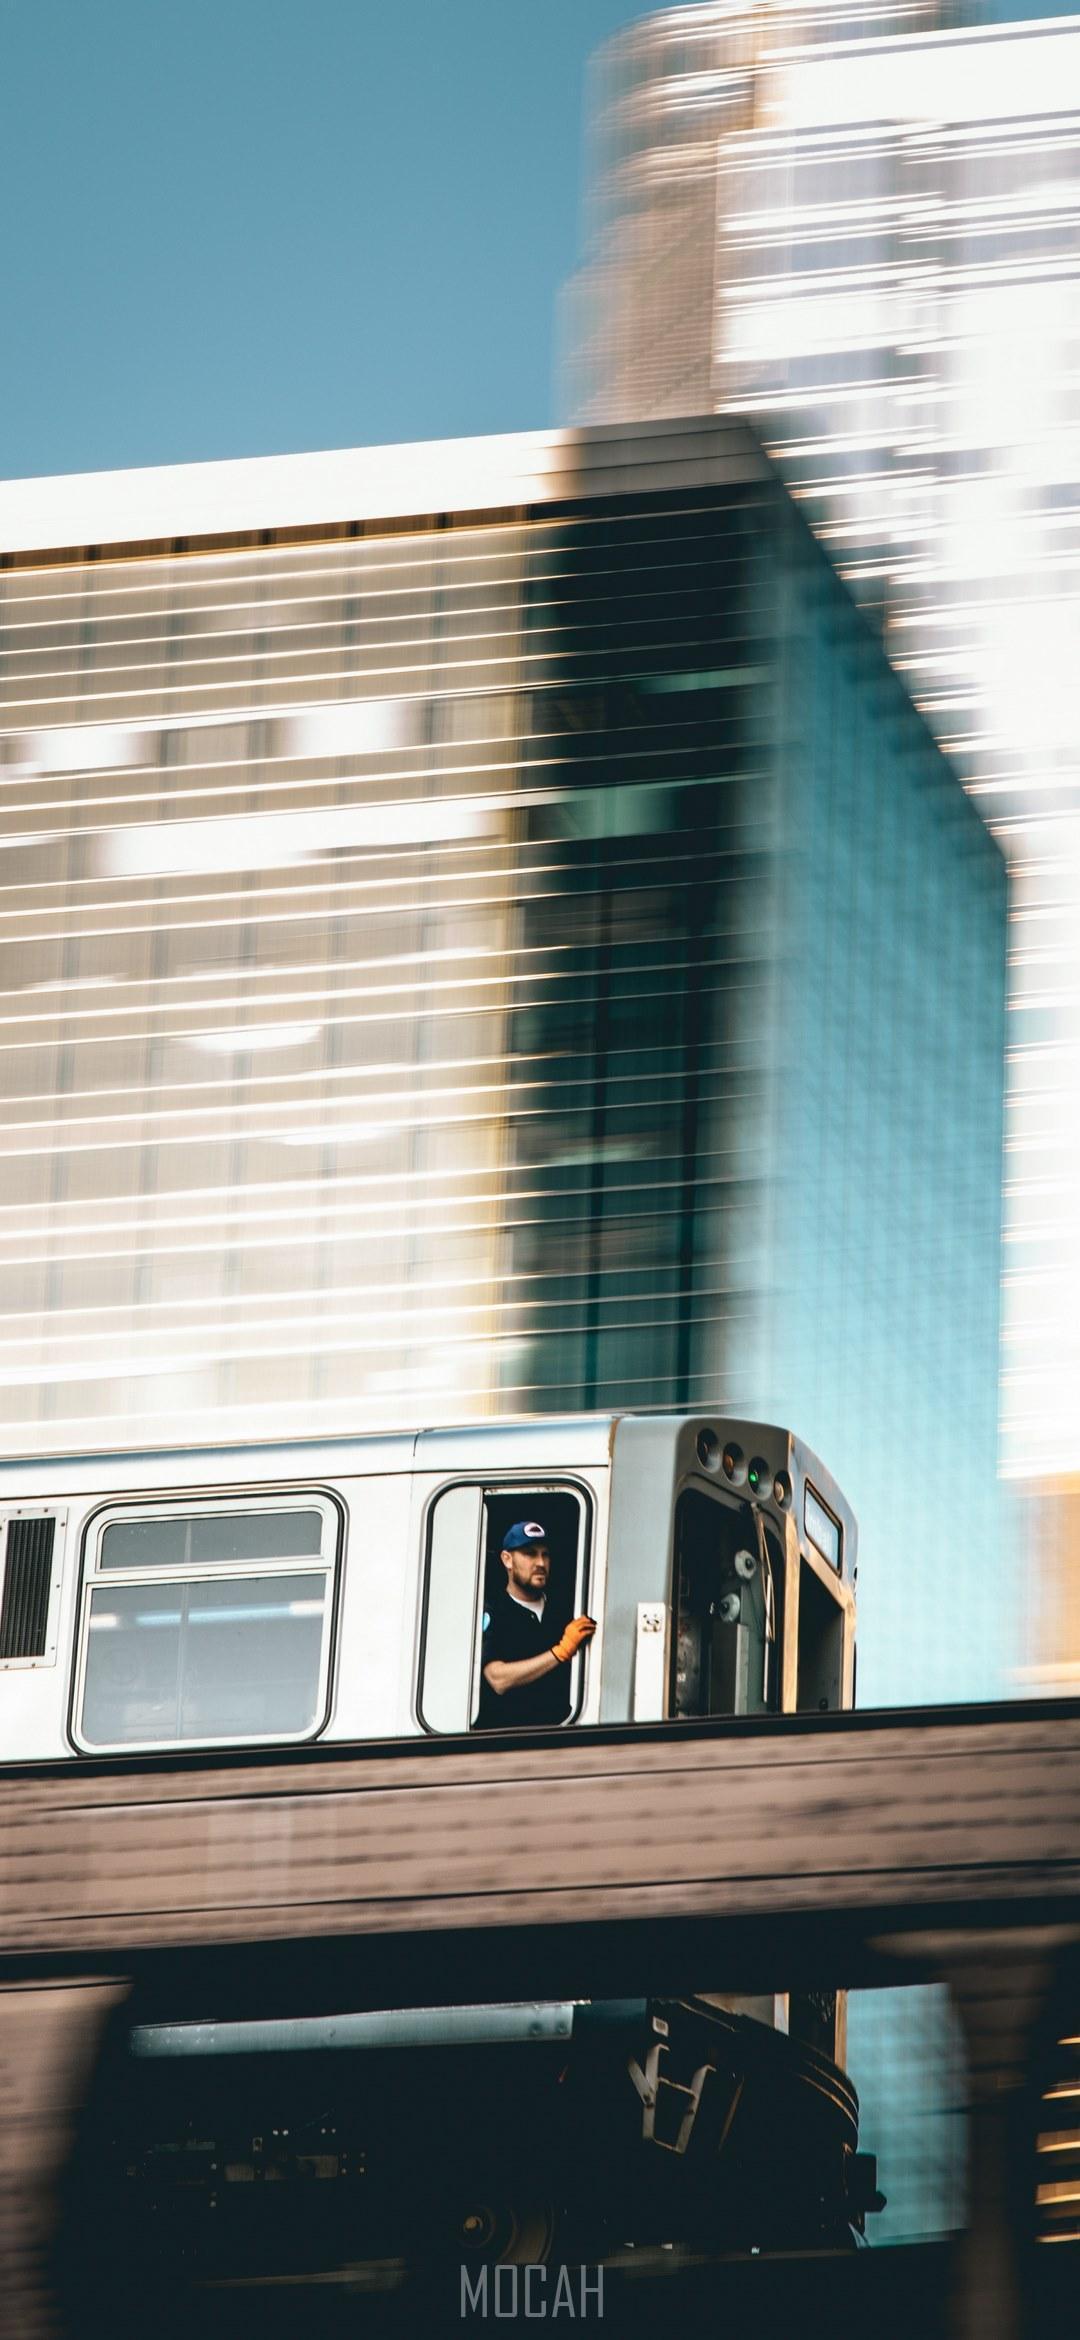 HD wallpaper, A Man Looking Out Of A Moving Urban Trail In Chicago, Xiaomi Mi 10 Ultra Screensaver Hd, Man In A Moving Urban Train, 1080X2340